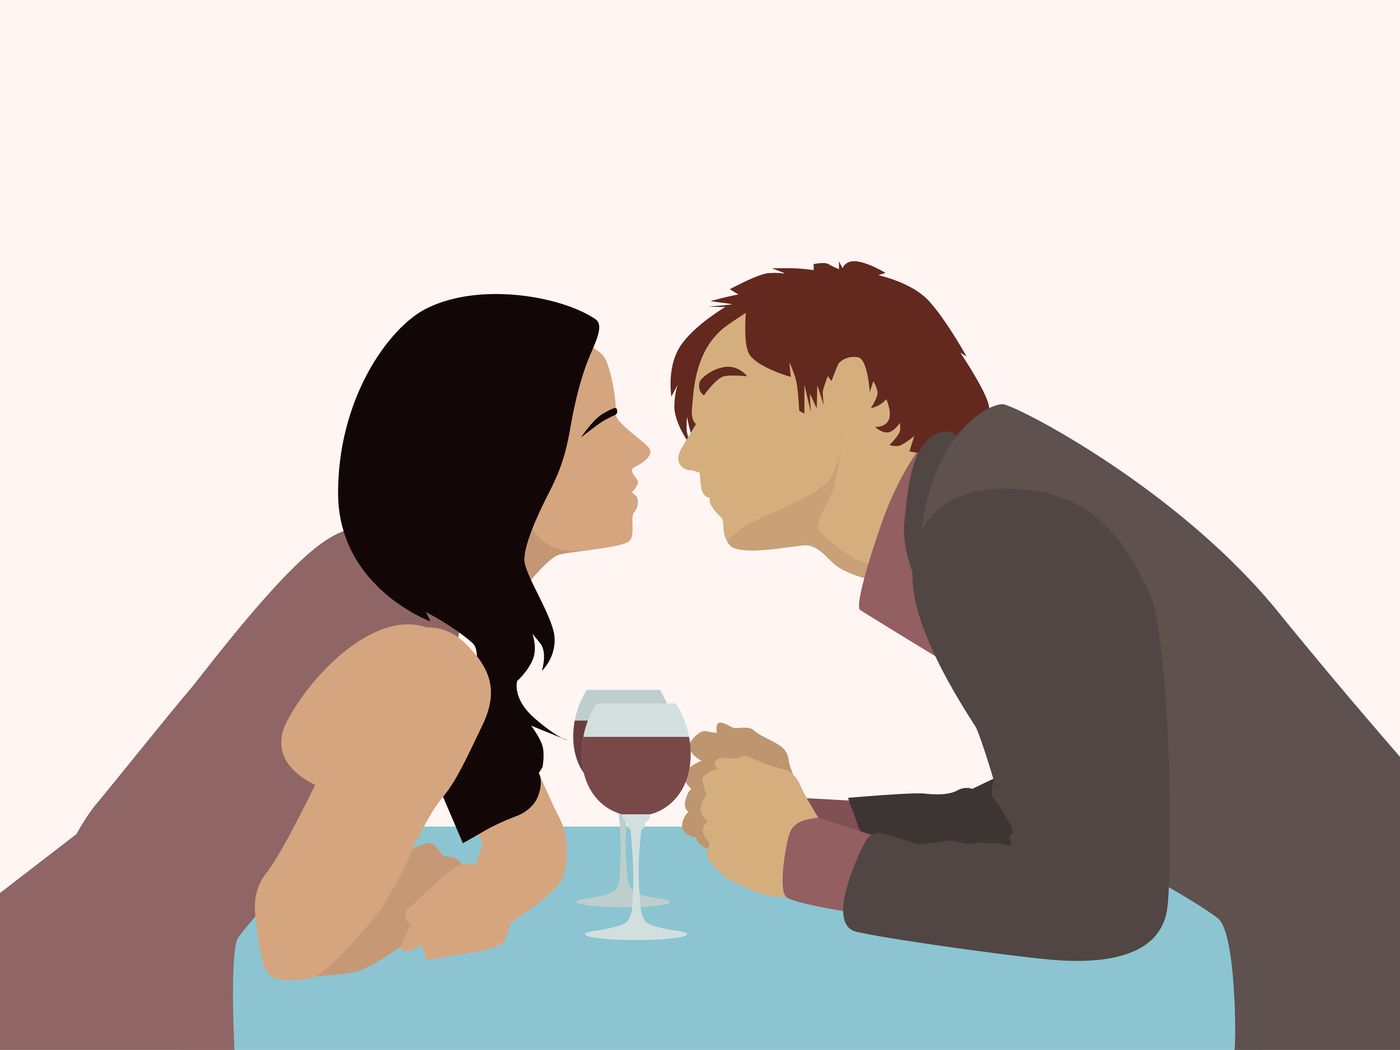 What comes first between courtship and dating?